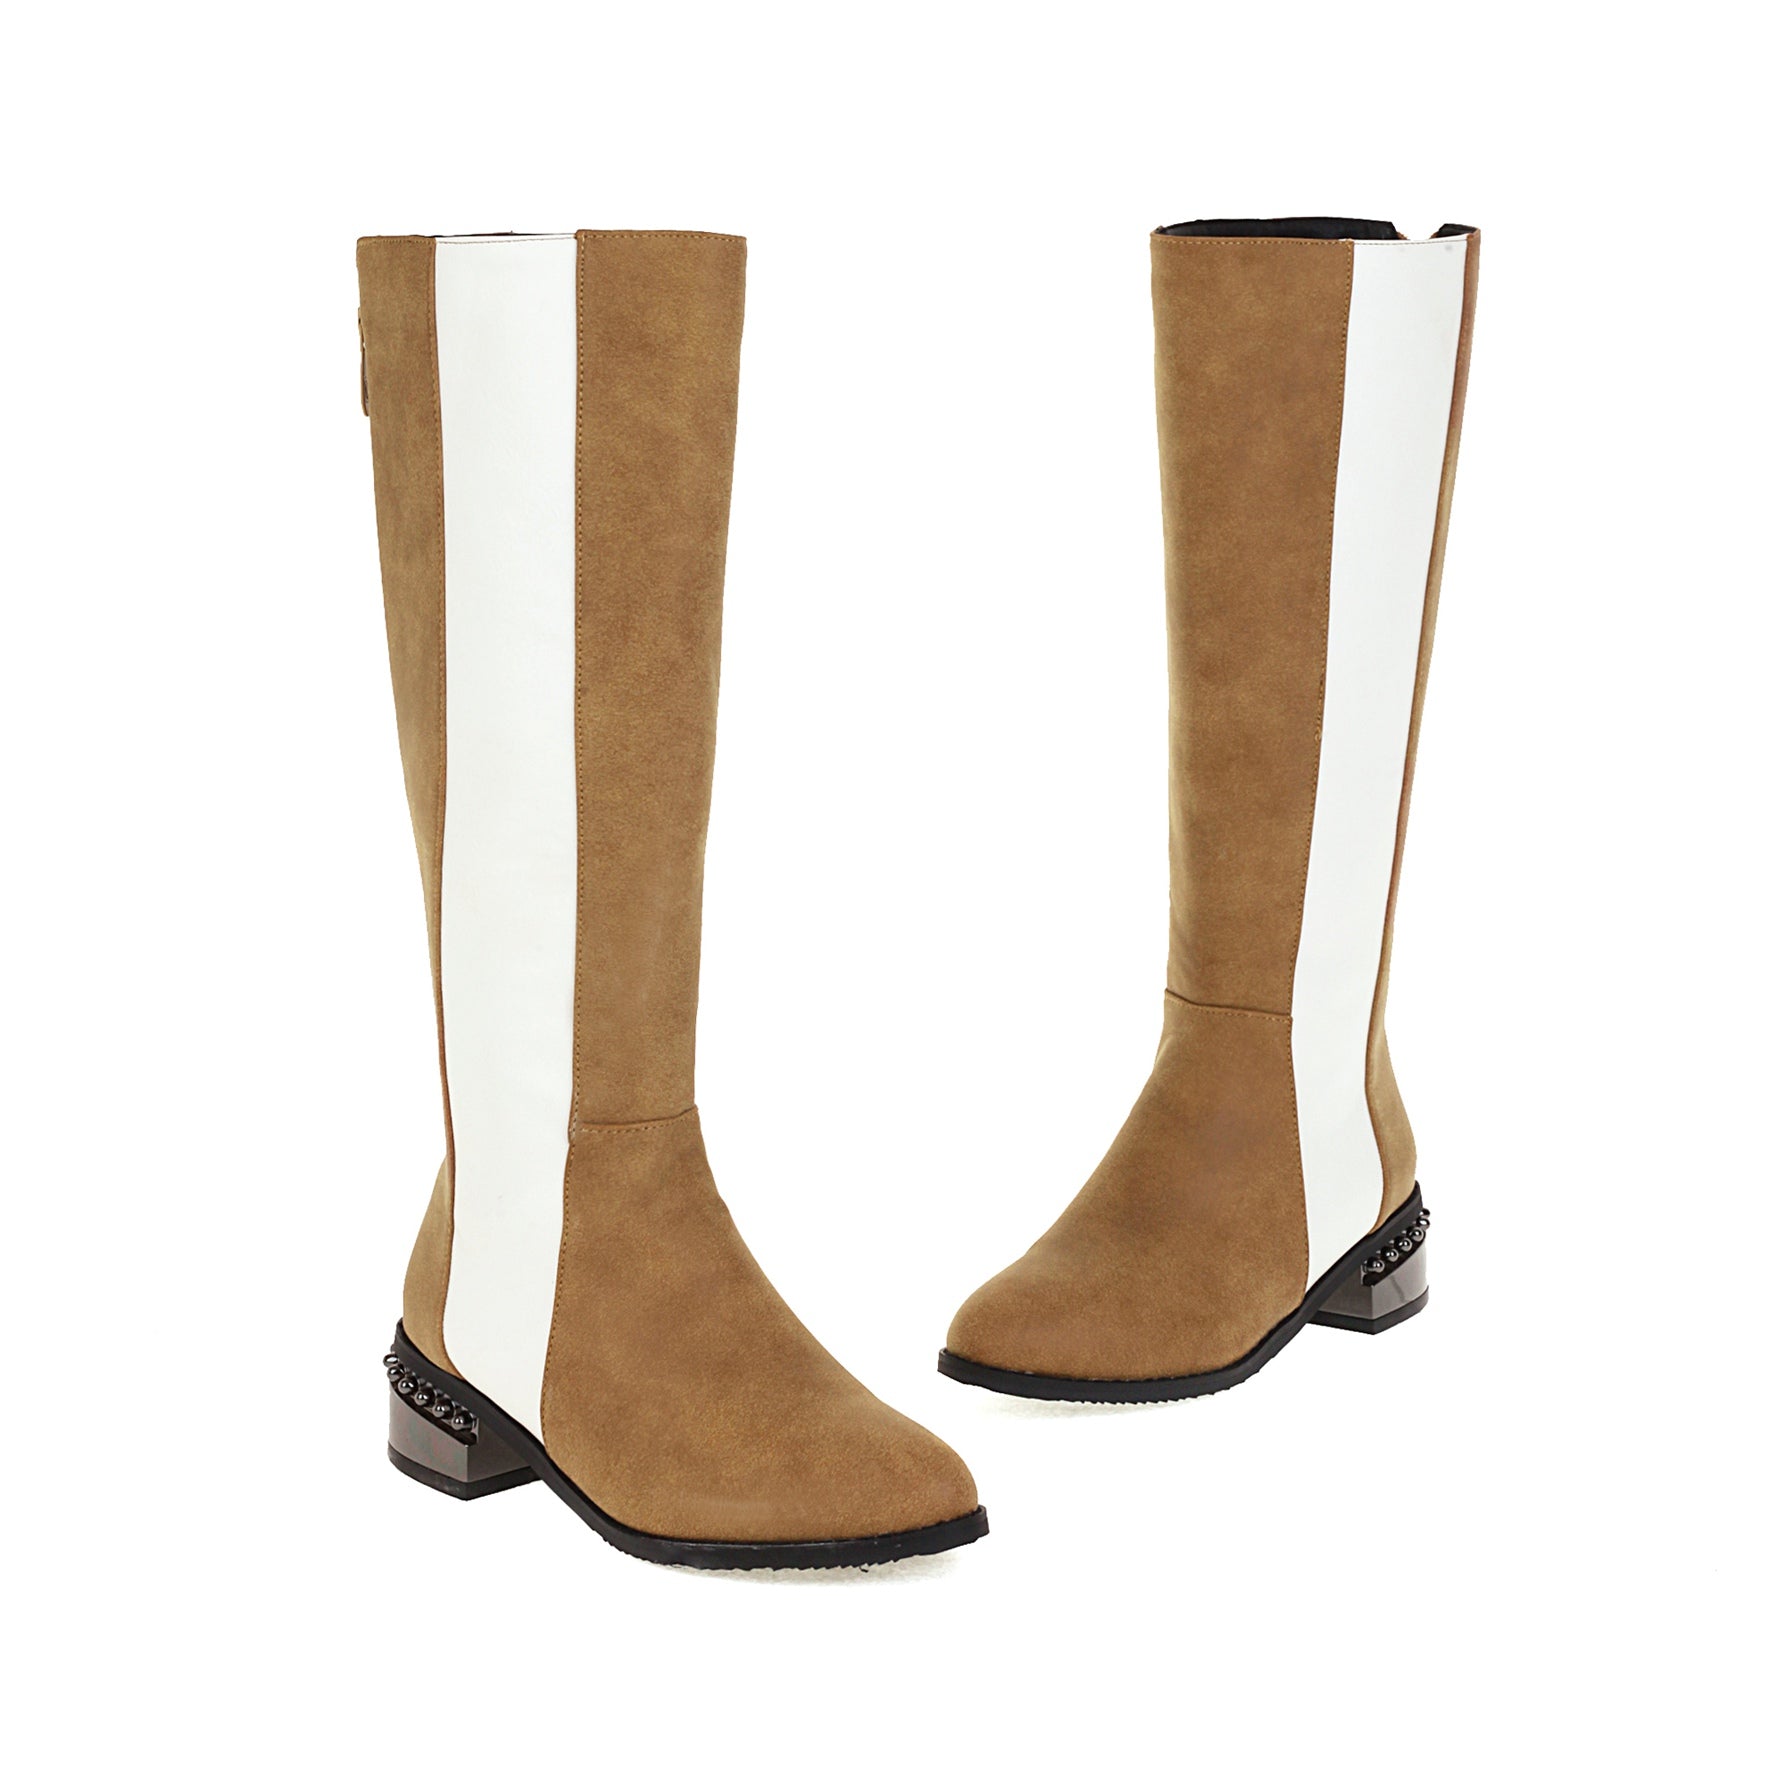 Bigsizeheels Concise Over the Knee Boots for women - Brown freeshipping - bigsizeheel®-size5-size15 -All Plus Sizes Available!